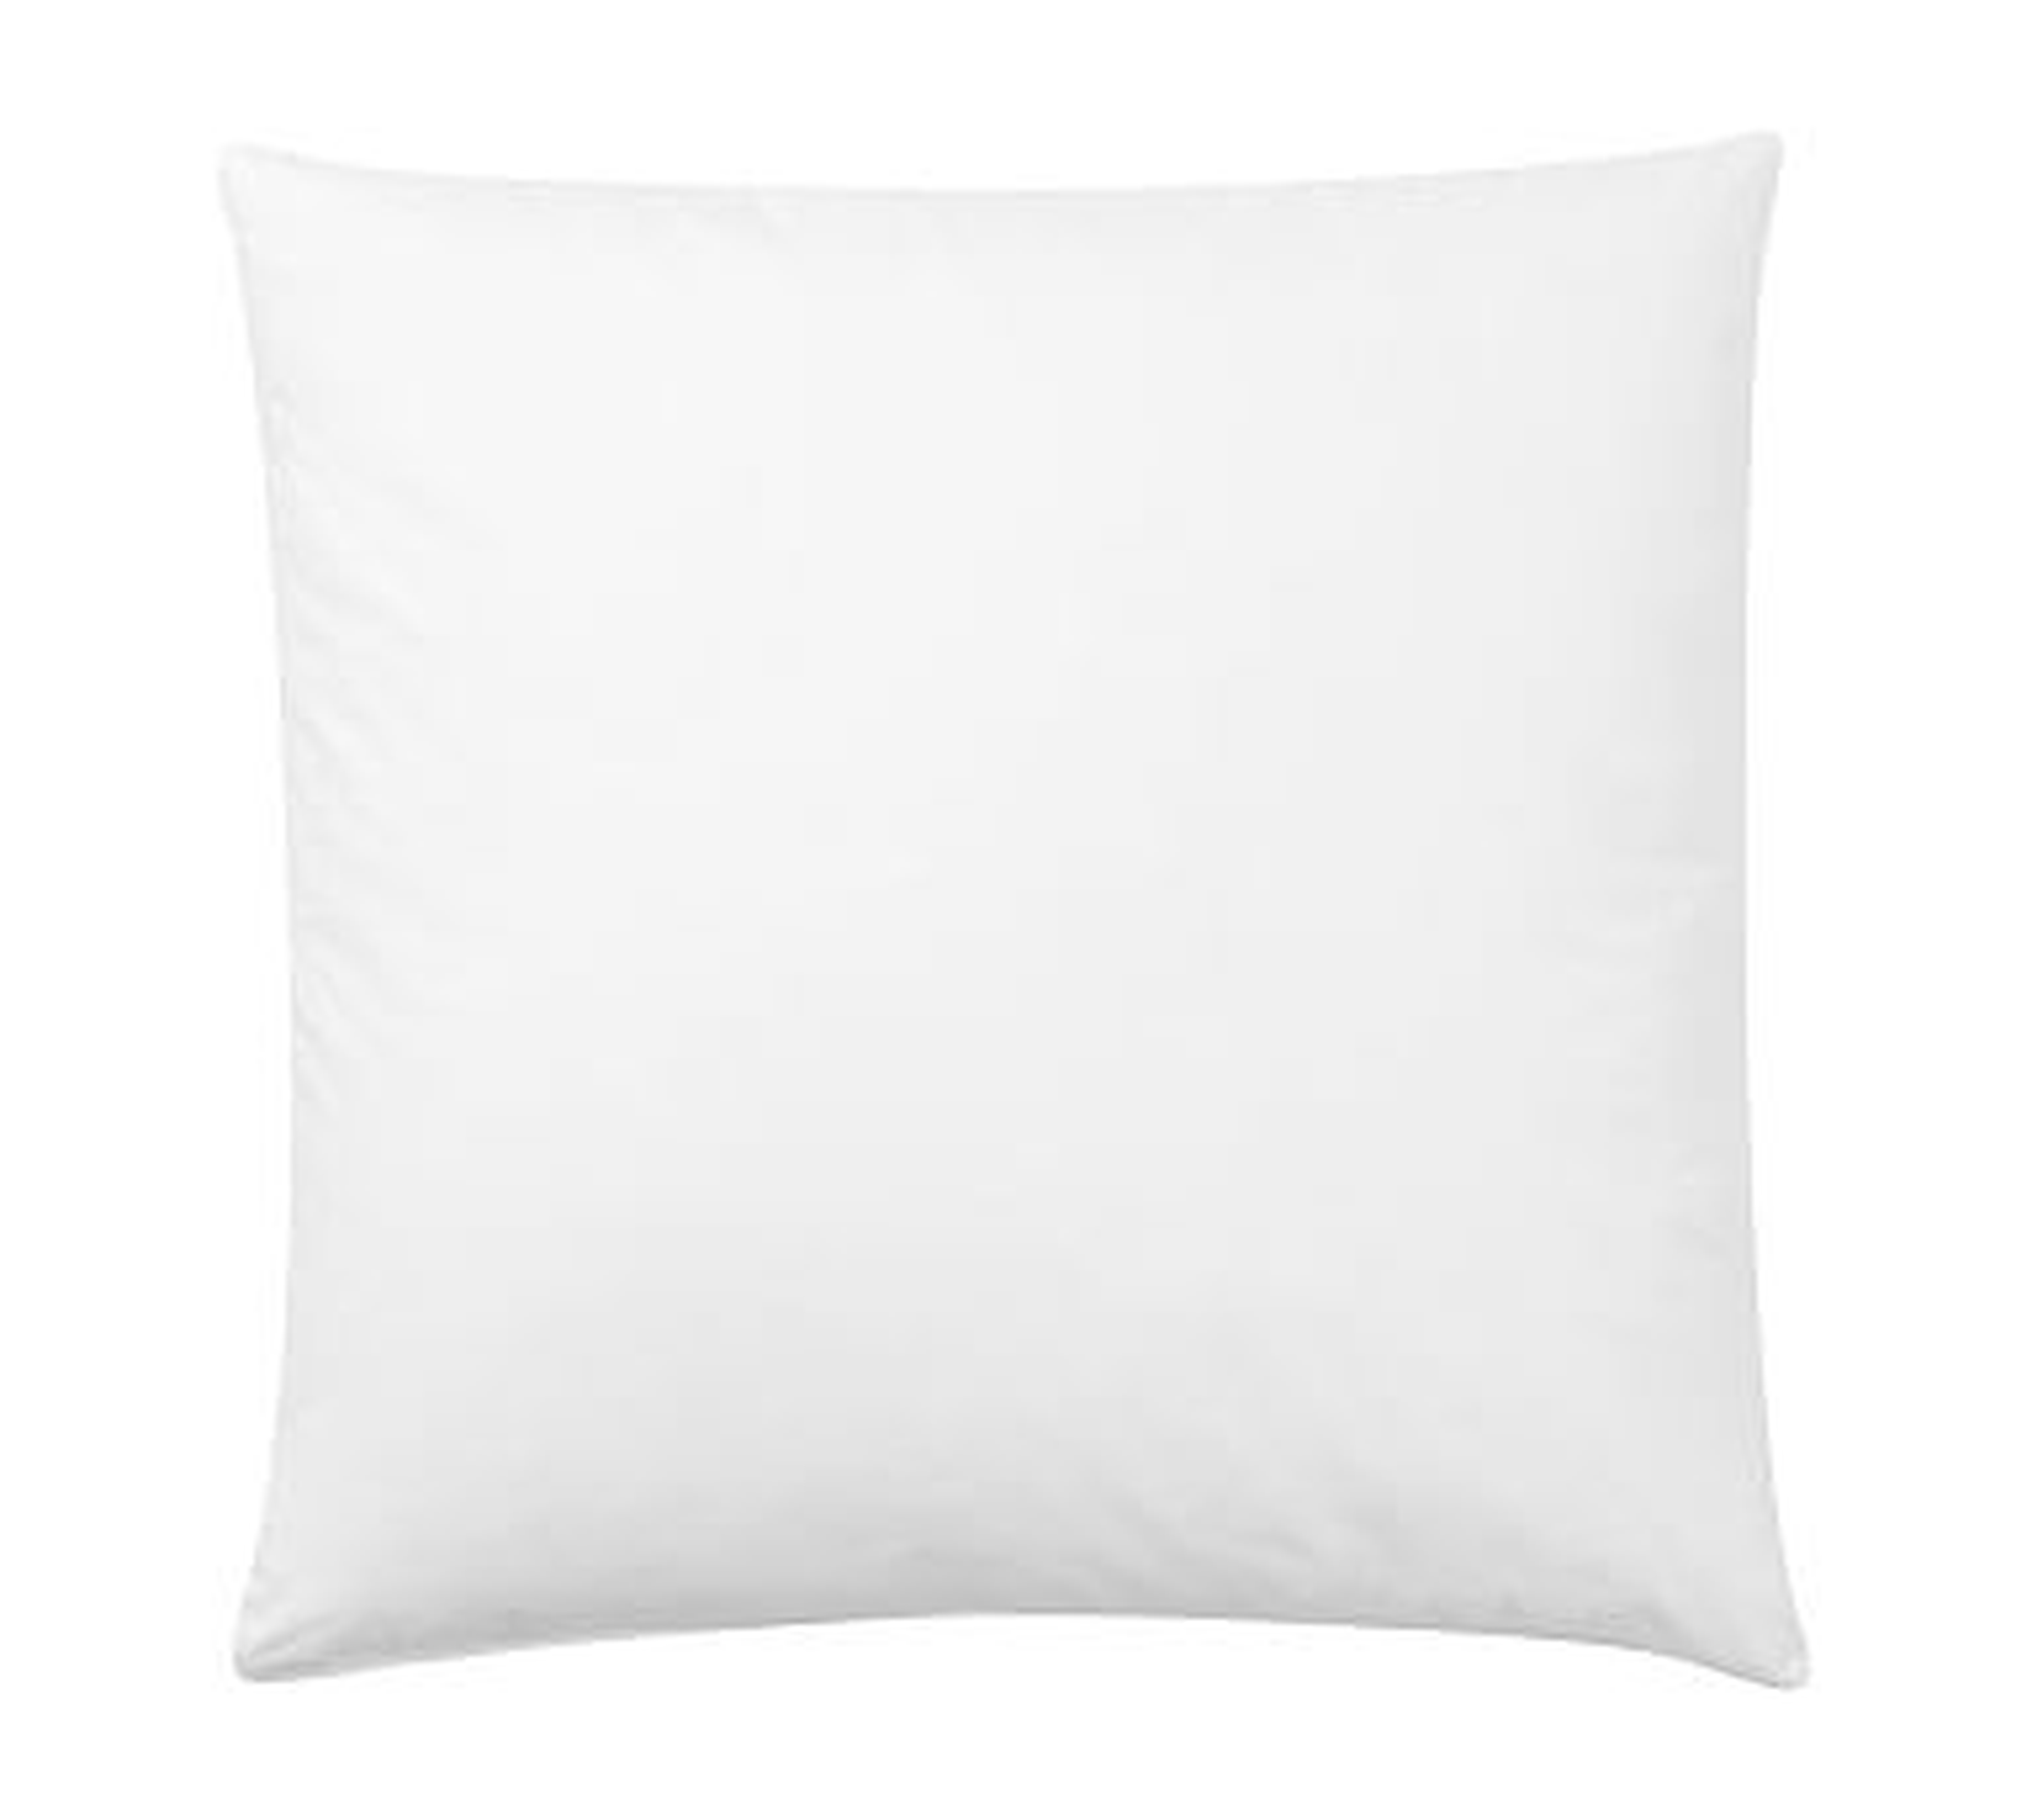 Down Feather Pillow Insert, 26 x 26" - Pottery Barn